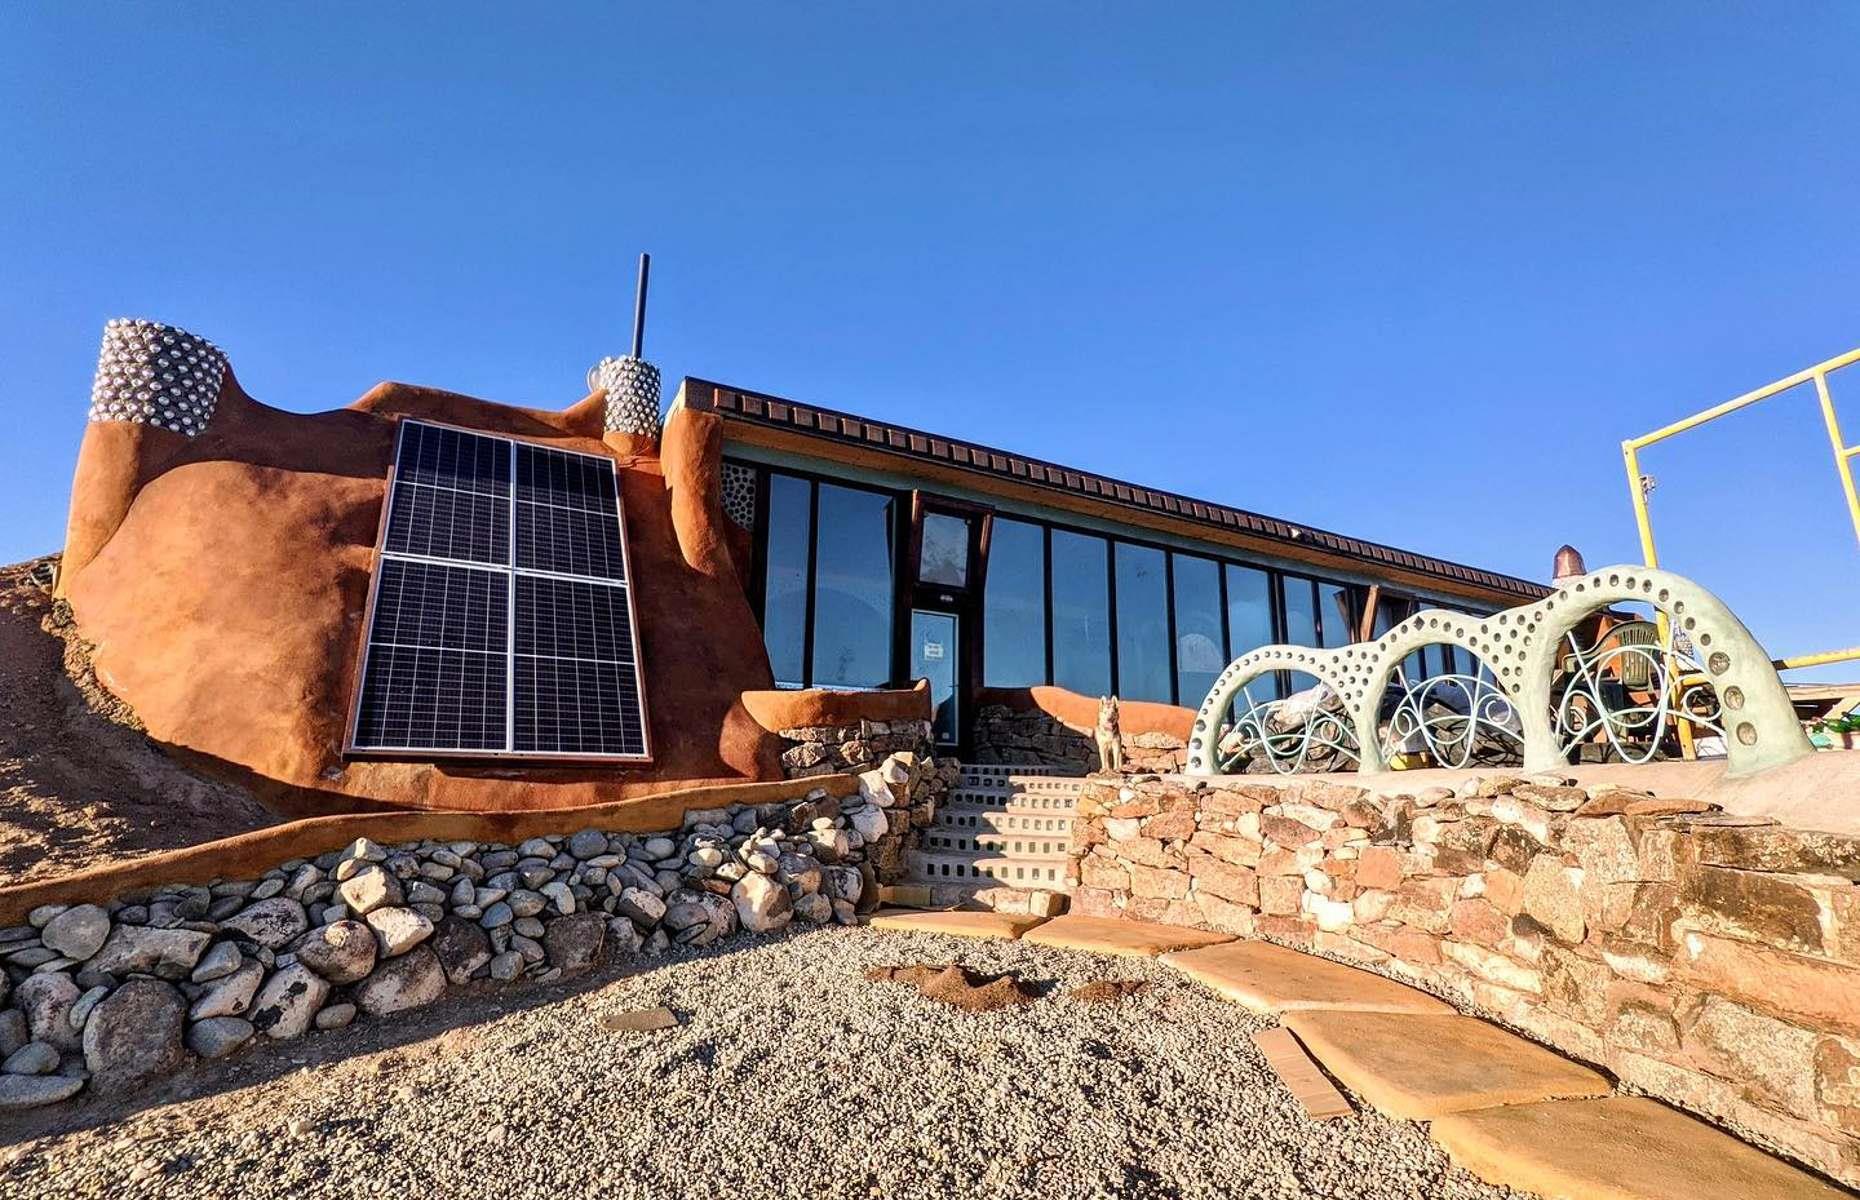 <p>If you’re after something a little quirky for your next break, look no further than Earthship Rentals. Situated in the heart of New Mexico’s desert, around 20 minutes from Taos, there are a number of different ‘earthships’ to suit various travel styles and budgets. According to its website, the ultra-eco accommodation is designed in such a way that it heats and cools itself without the need for fossil fuels, while each structure has its very own renewable power plant to provide light and electricity. Despite being completely off-grid, they feature all the mod-cons you could need, including Wi-Fi, TVs and washing machines. </p>  <p><a href="https://www.loveexploring.com/galleries/124351/escape-the-world-at-these-fabulous-remote-retreats?page=1"><strong>Now discover the world's most remote retreats</strong></a></p>